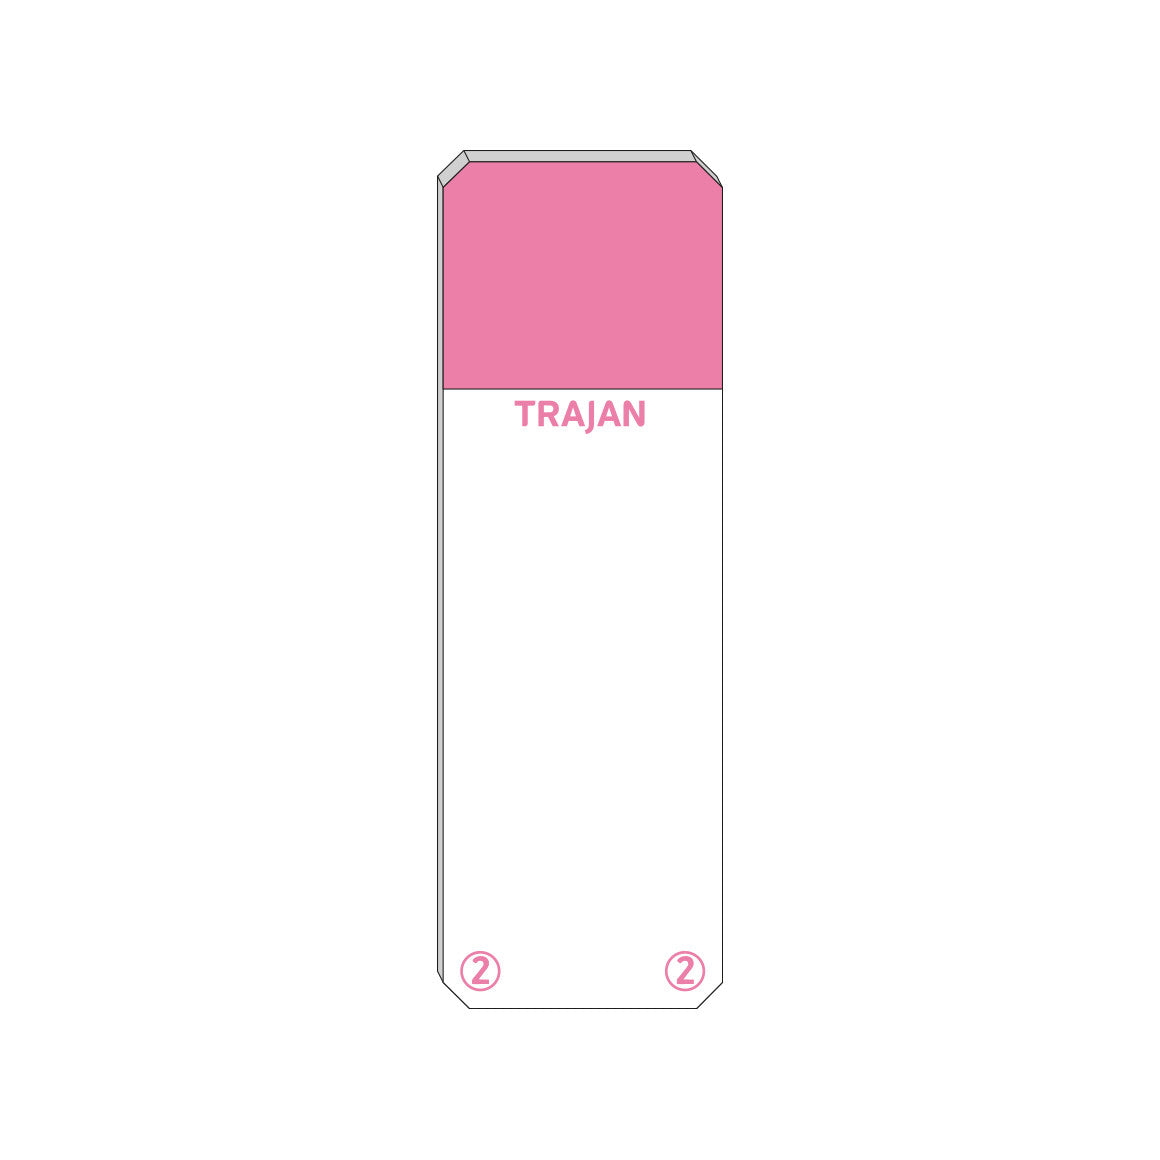 Trajan Scientific and Medical, Series 2 Adhesive Microscope Slides, Pink, Frost 20 mm, 76 mm x 26 mm